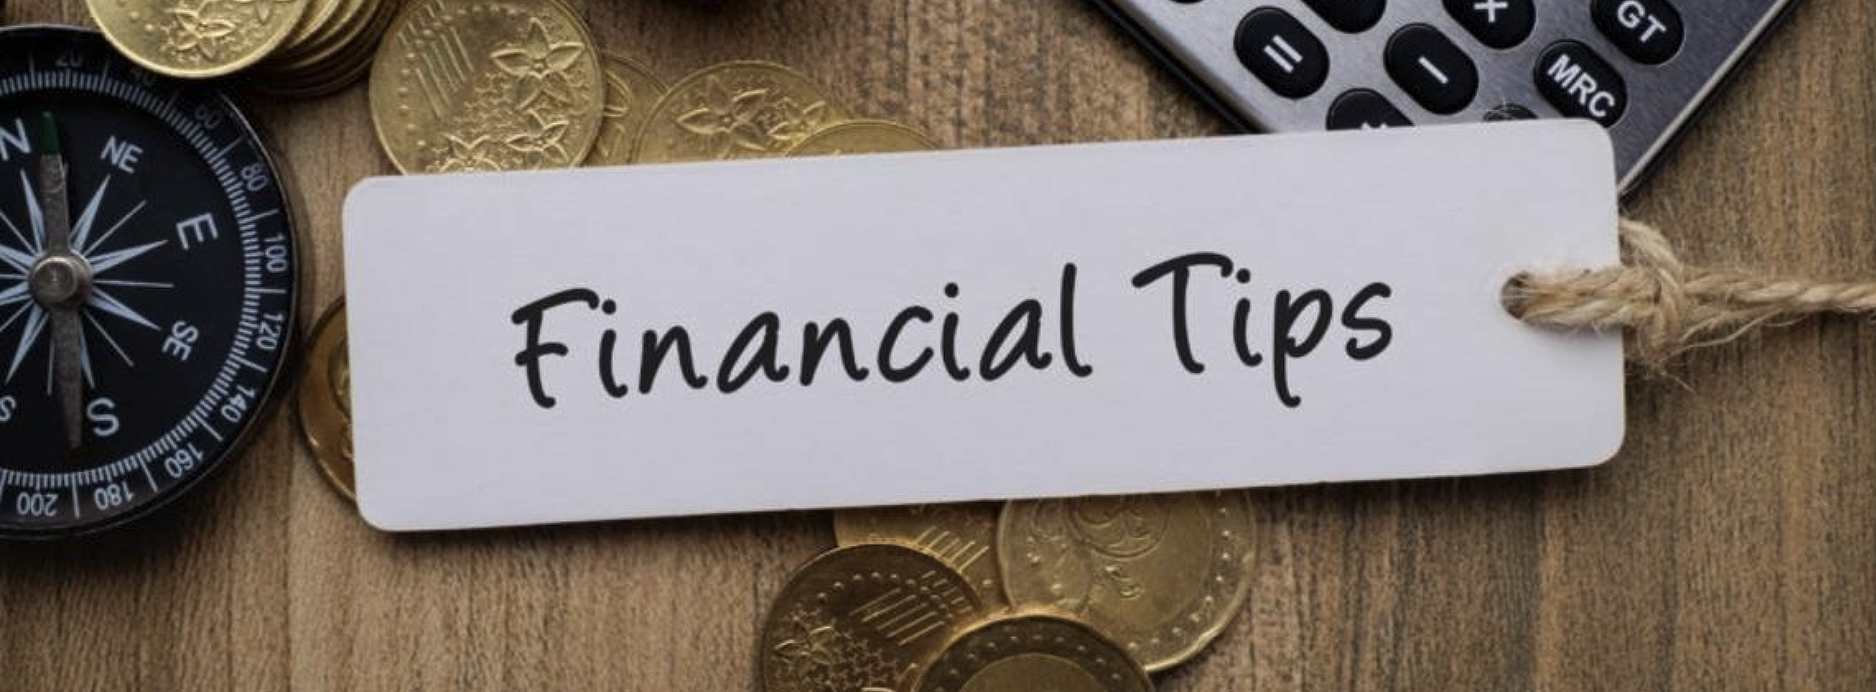 New for March: Financial Tip